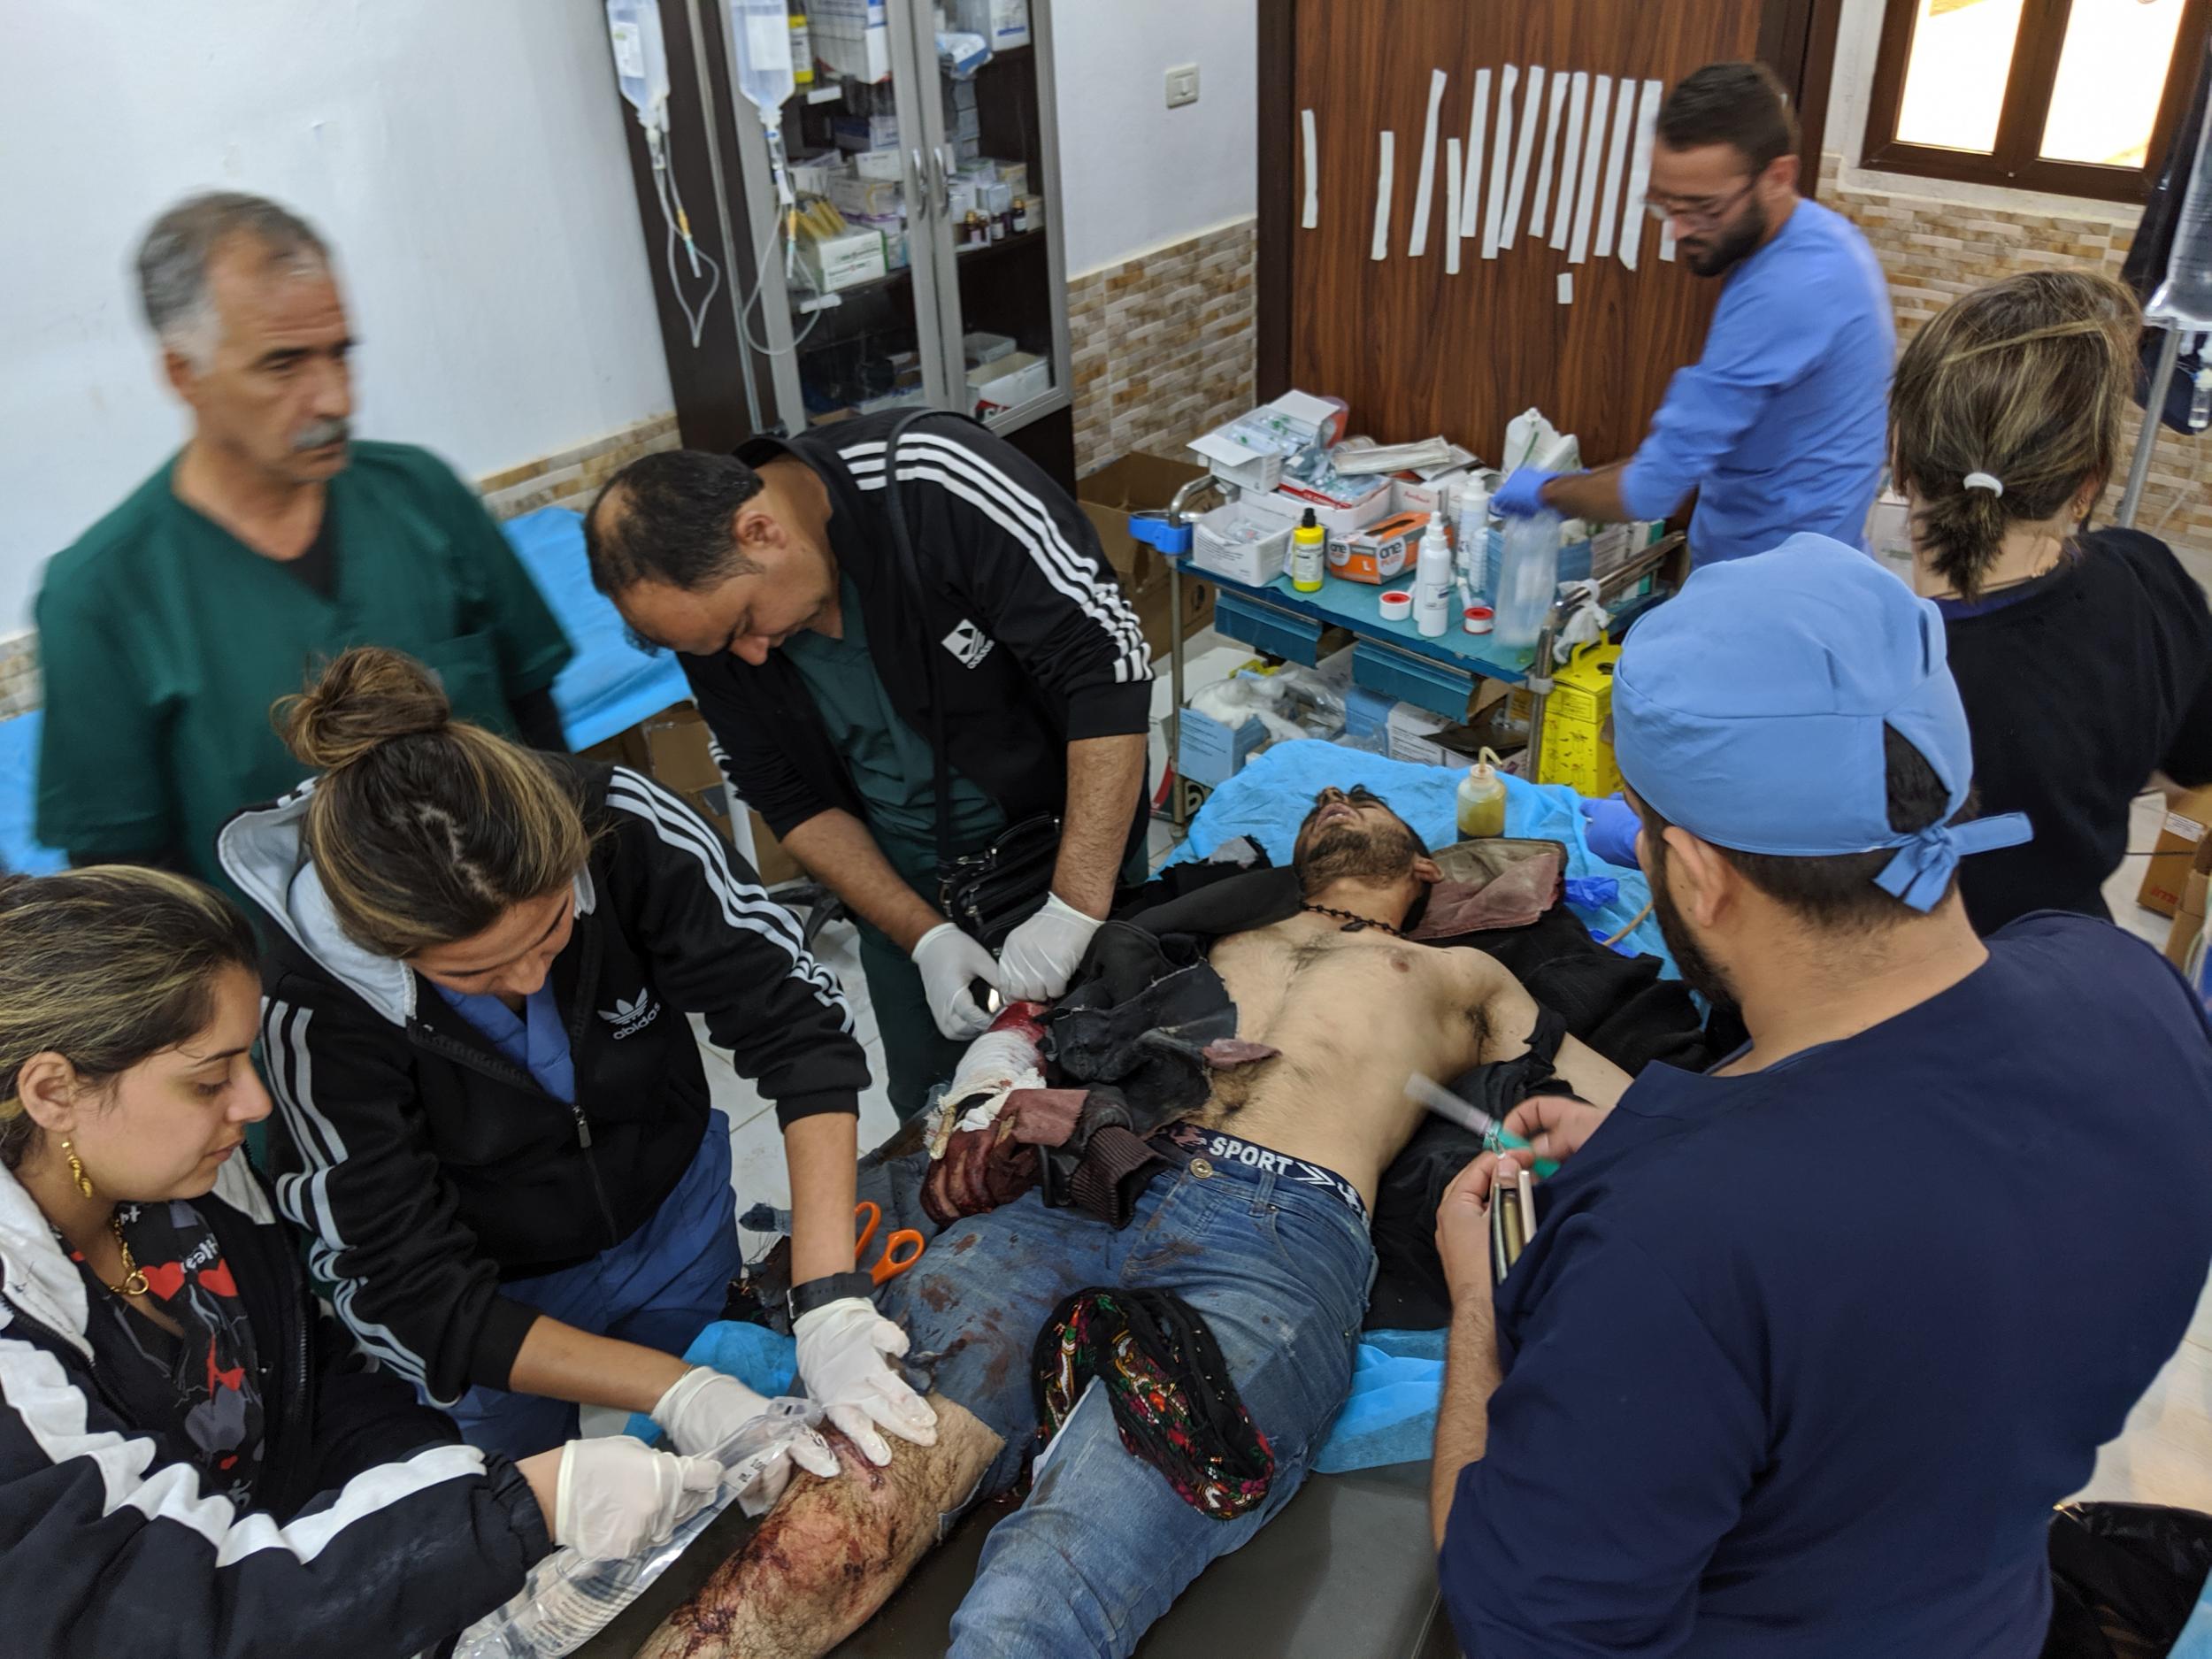 A man wounded by a mortar fire is brought into the emergency room at Tal Tamr hospital (Richard Hall/The Independent)